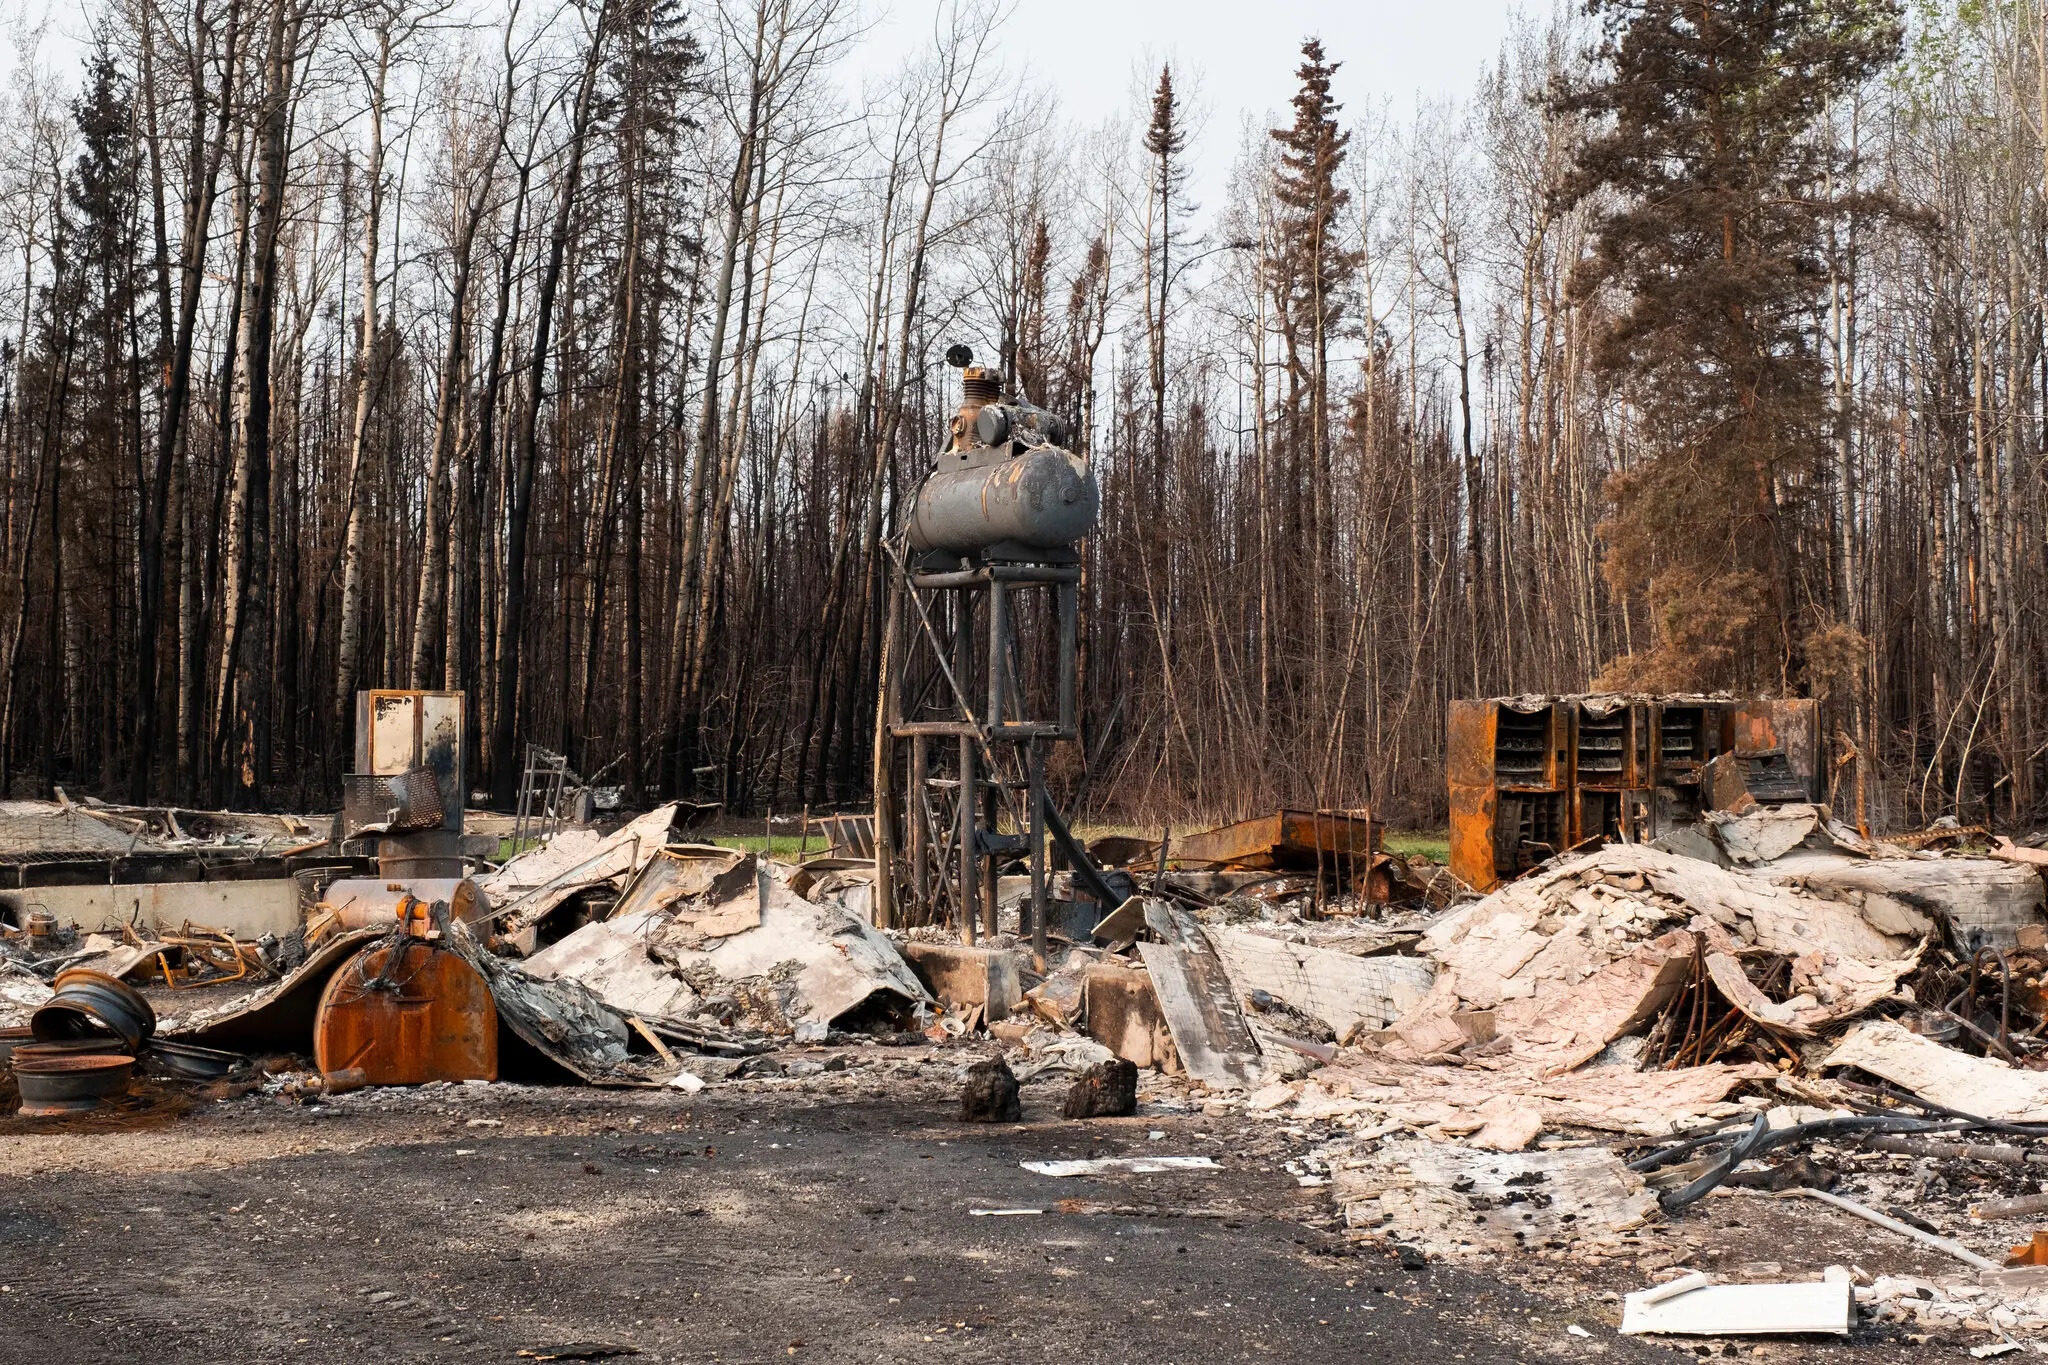 Destruction left behind by wildfires in Drayton Valley, Alberta in May 2023. Photo: Jen Osborne / The New York Times